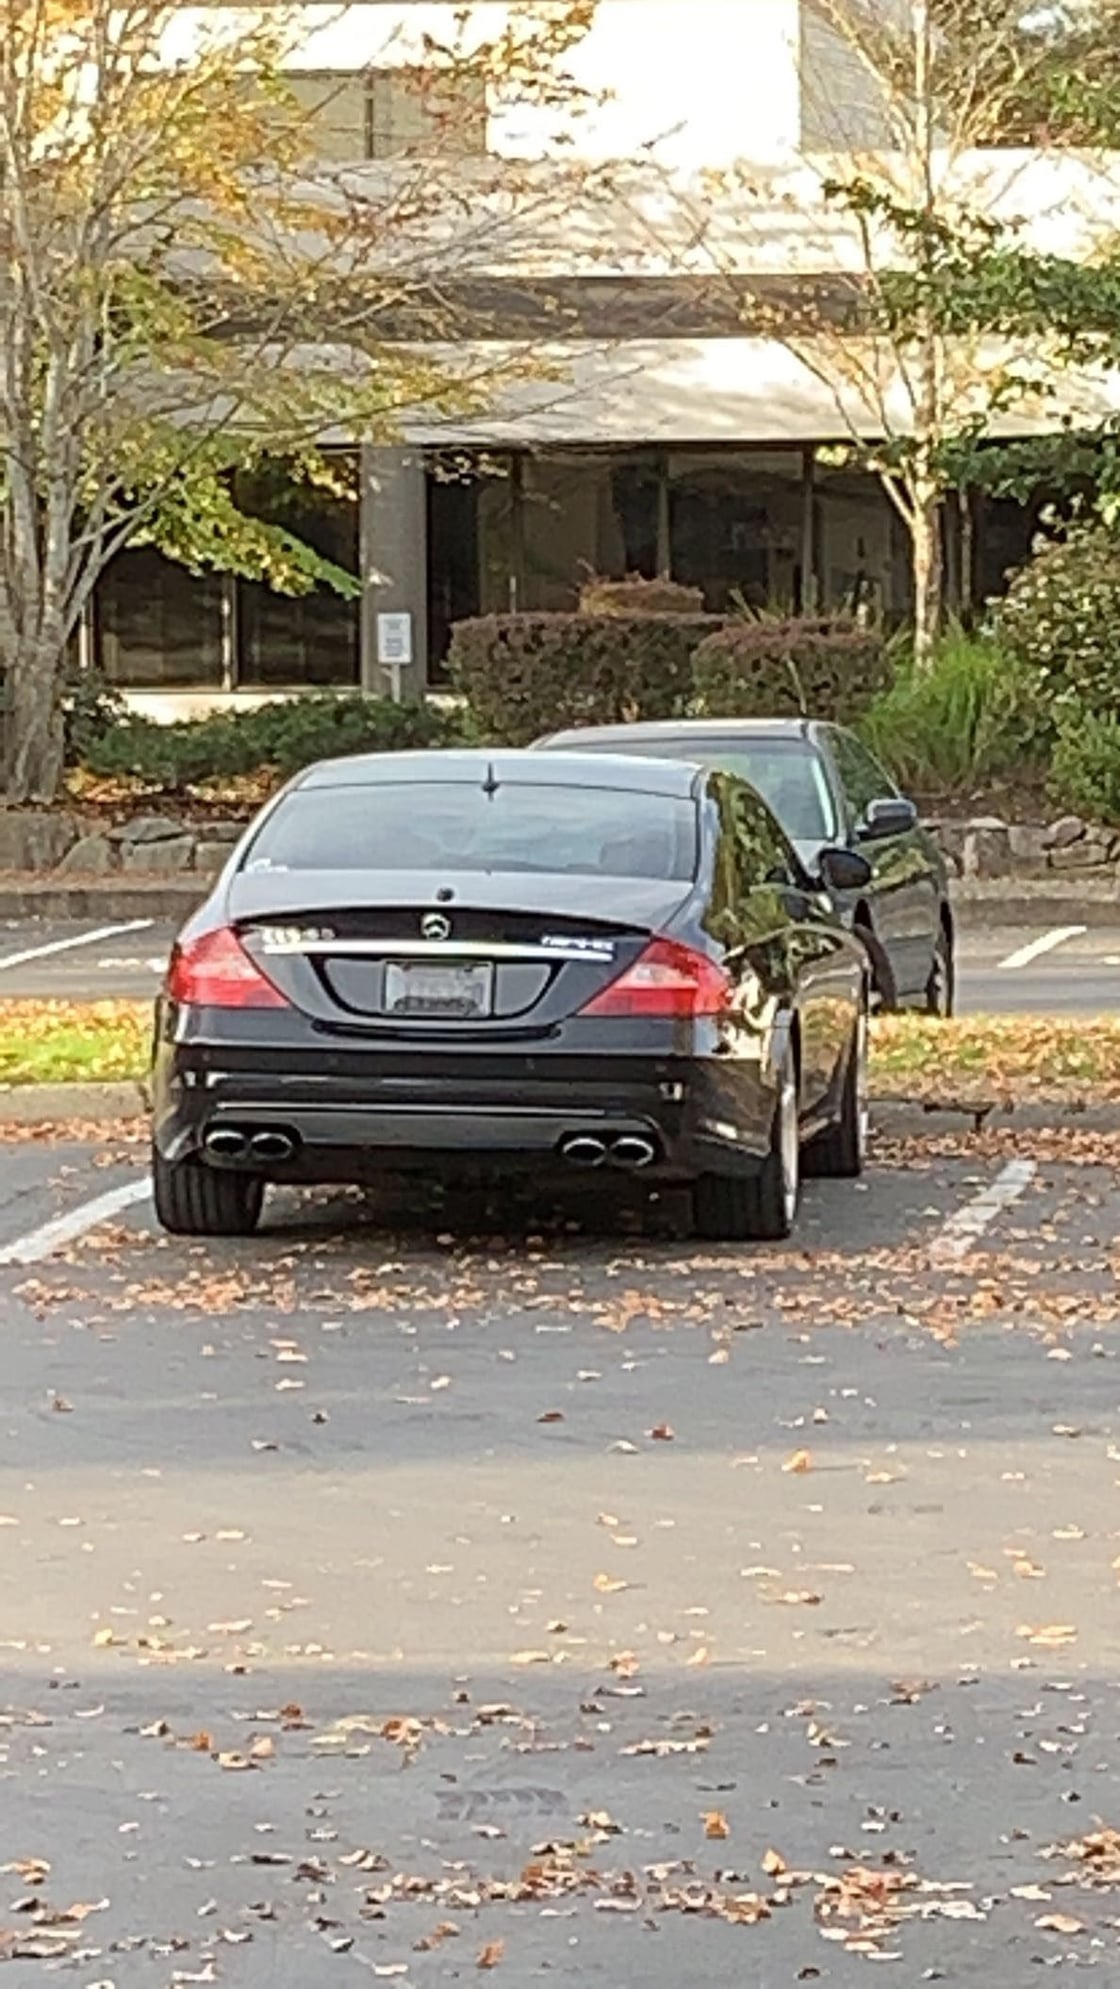 2006 Mercedes-Benz CLS55 AMG - CLS55 For Sale - Used - VIN WDDDJ76X66A040118 - 120,400 Miles - 8 cyl - 2WD - Automatic - Sedan - Black - Puyallup, WA 98373, United States